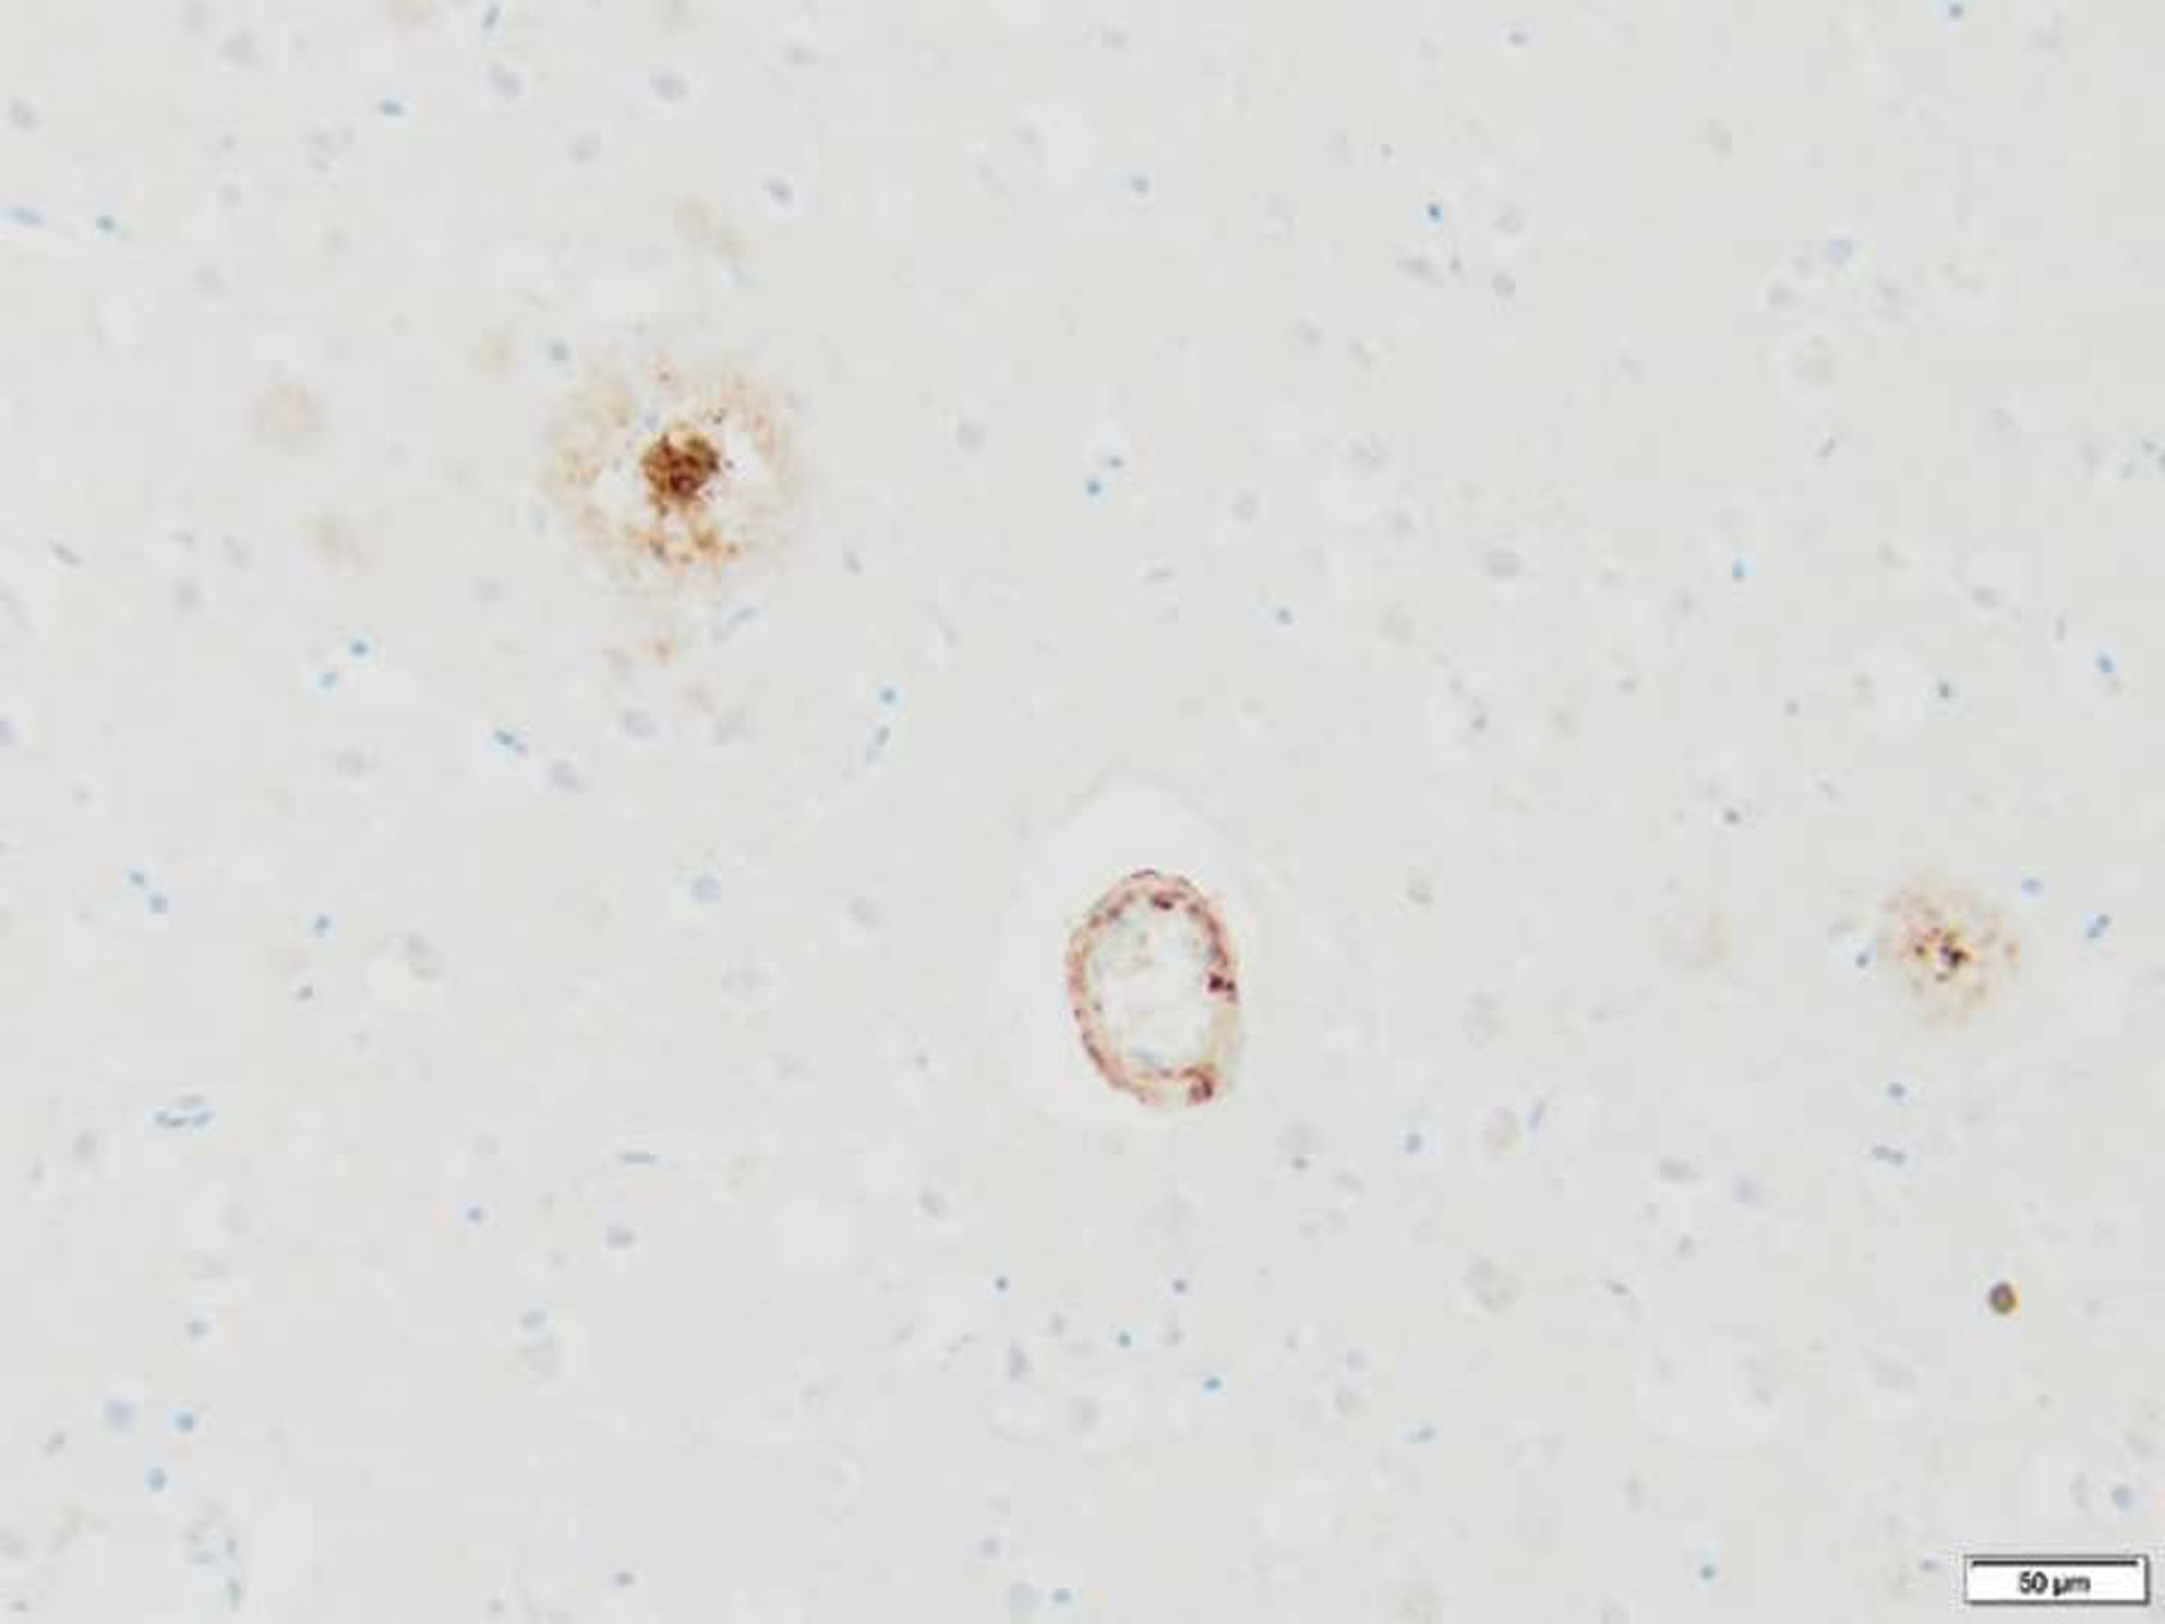 Immunohistochemical stain highlighting cortically localized amyloid-ʲ plaques and vessel wall amyloid-ʲ deposition in Alzheimer’s disease (amyloid-ʲ ICH, 200x).